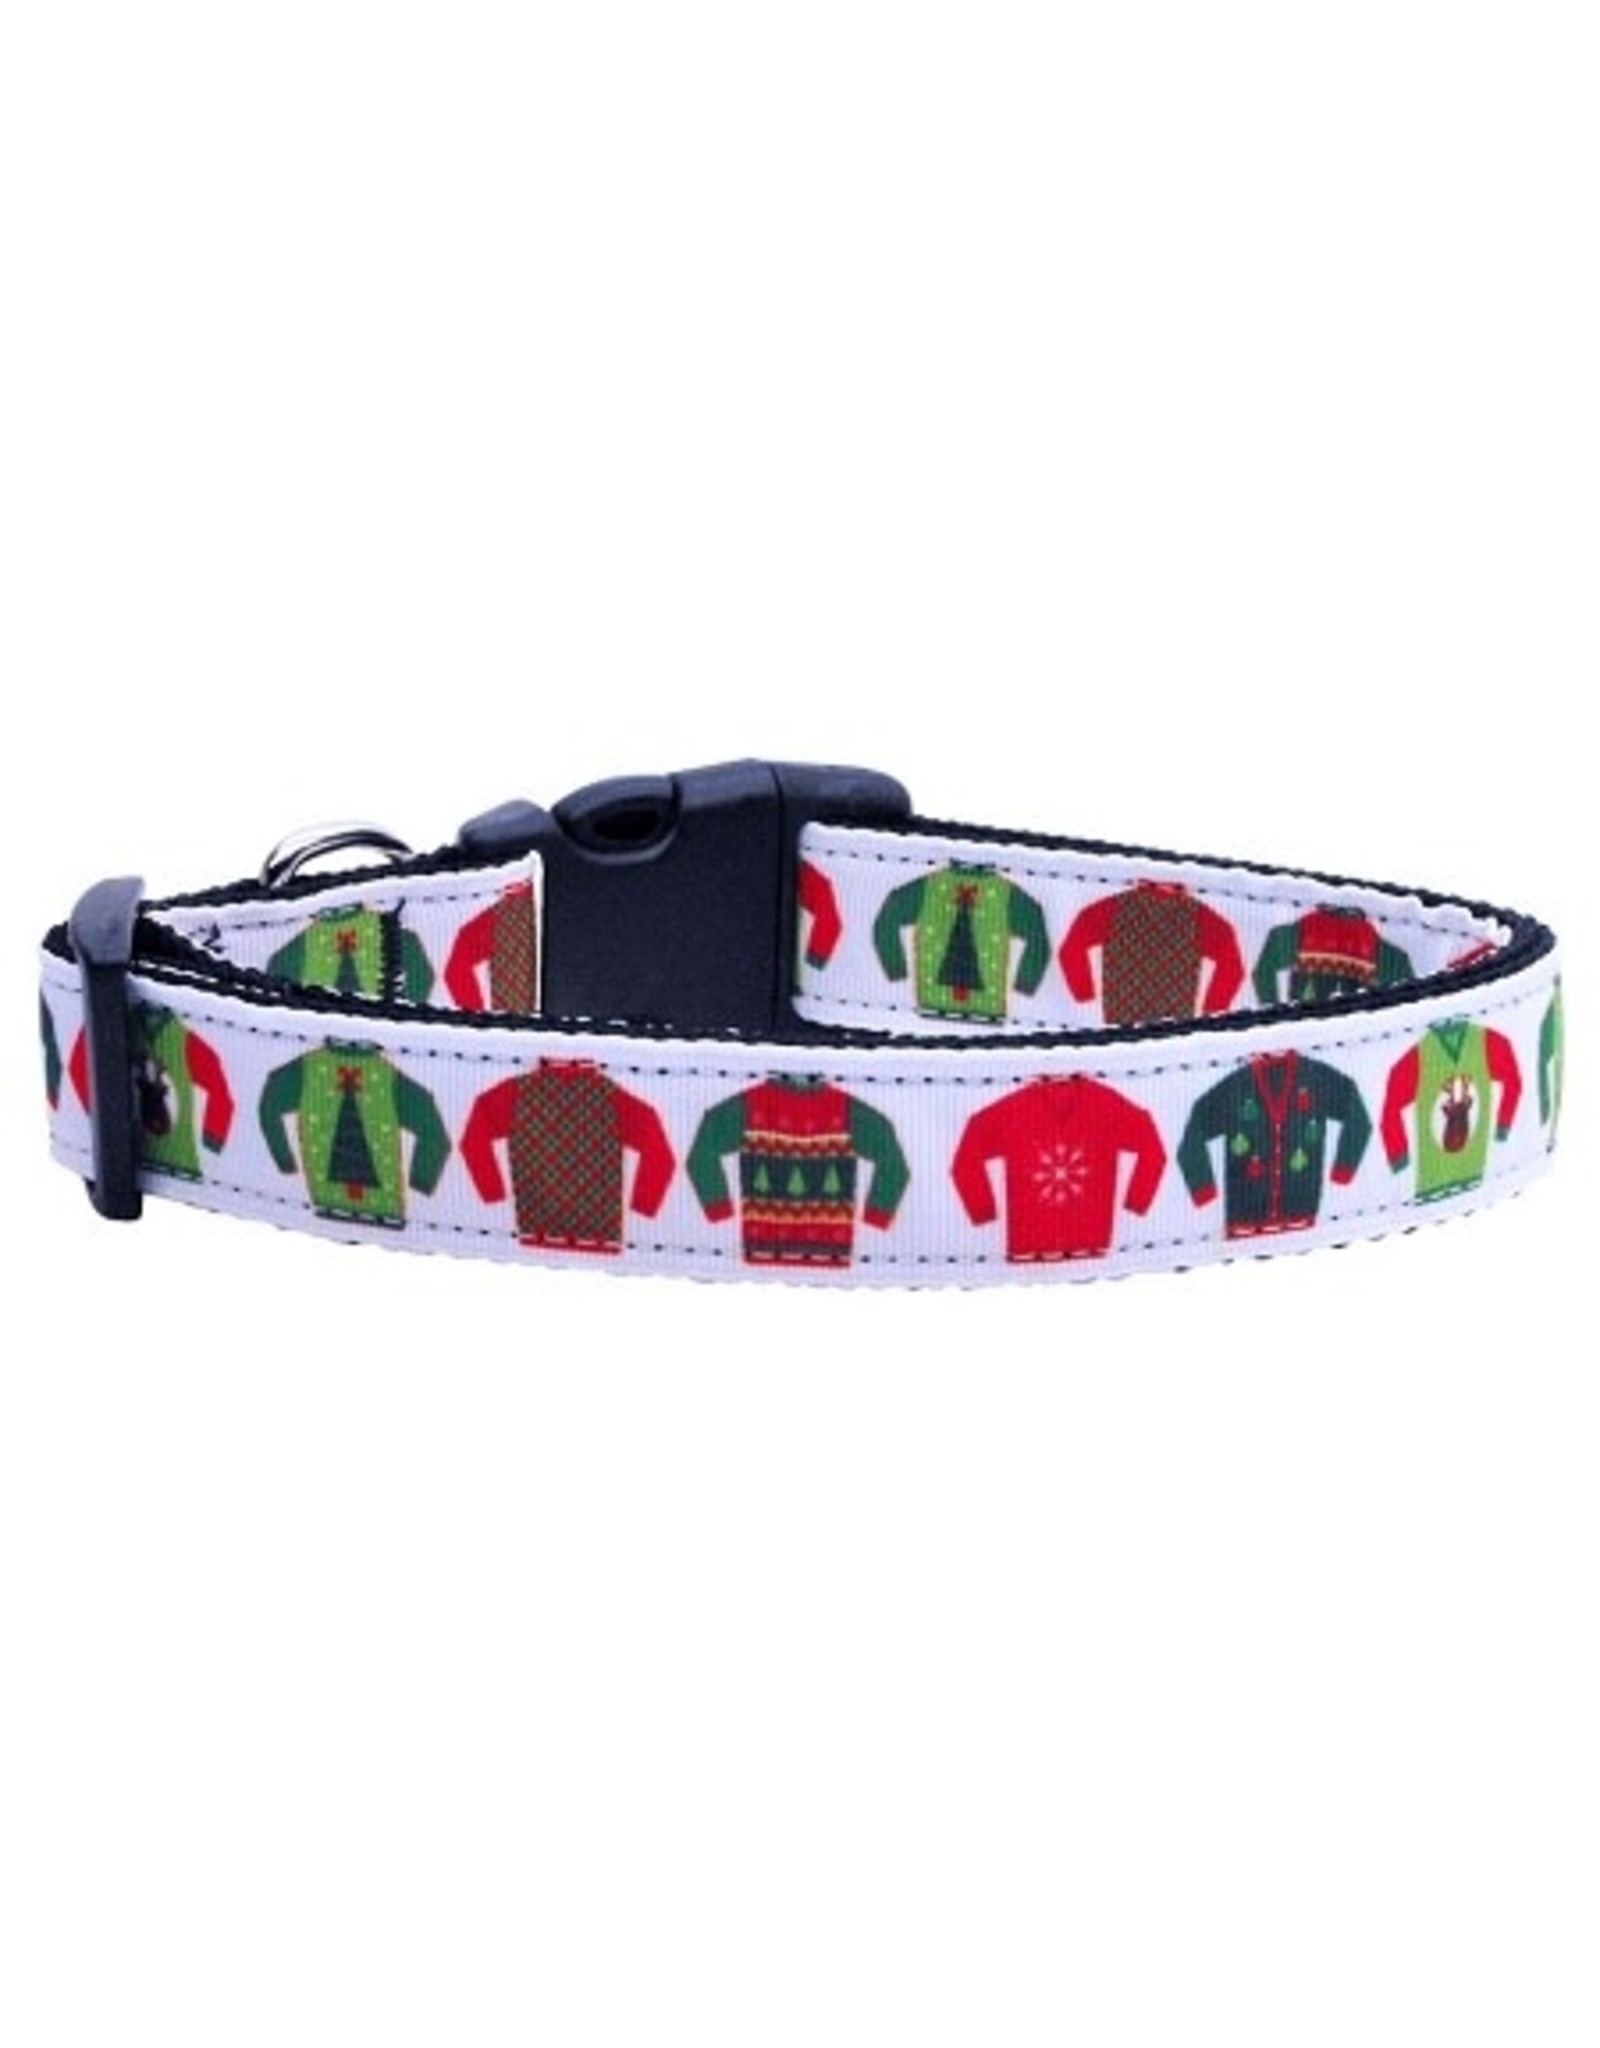 Mirage Pet Products Mirage Pet Products Holiday Dog Collar